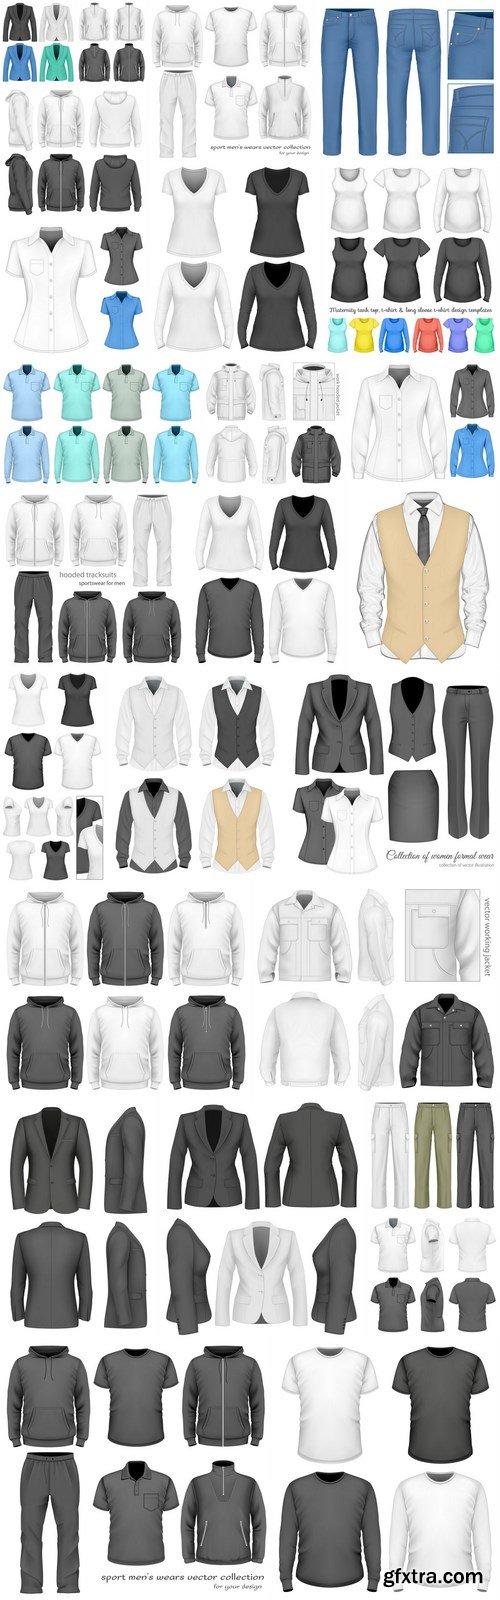 Mockup Clothes Collection - 26 Vector